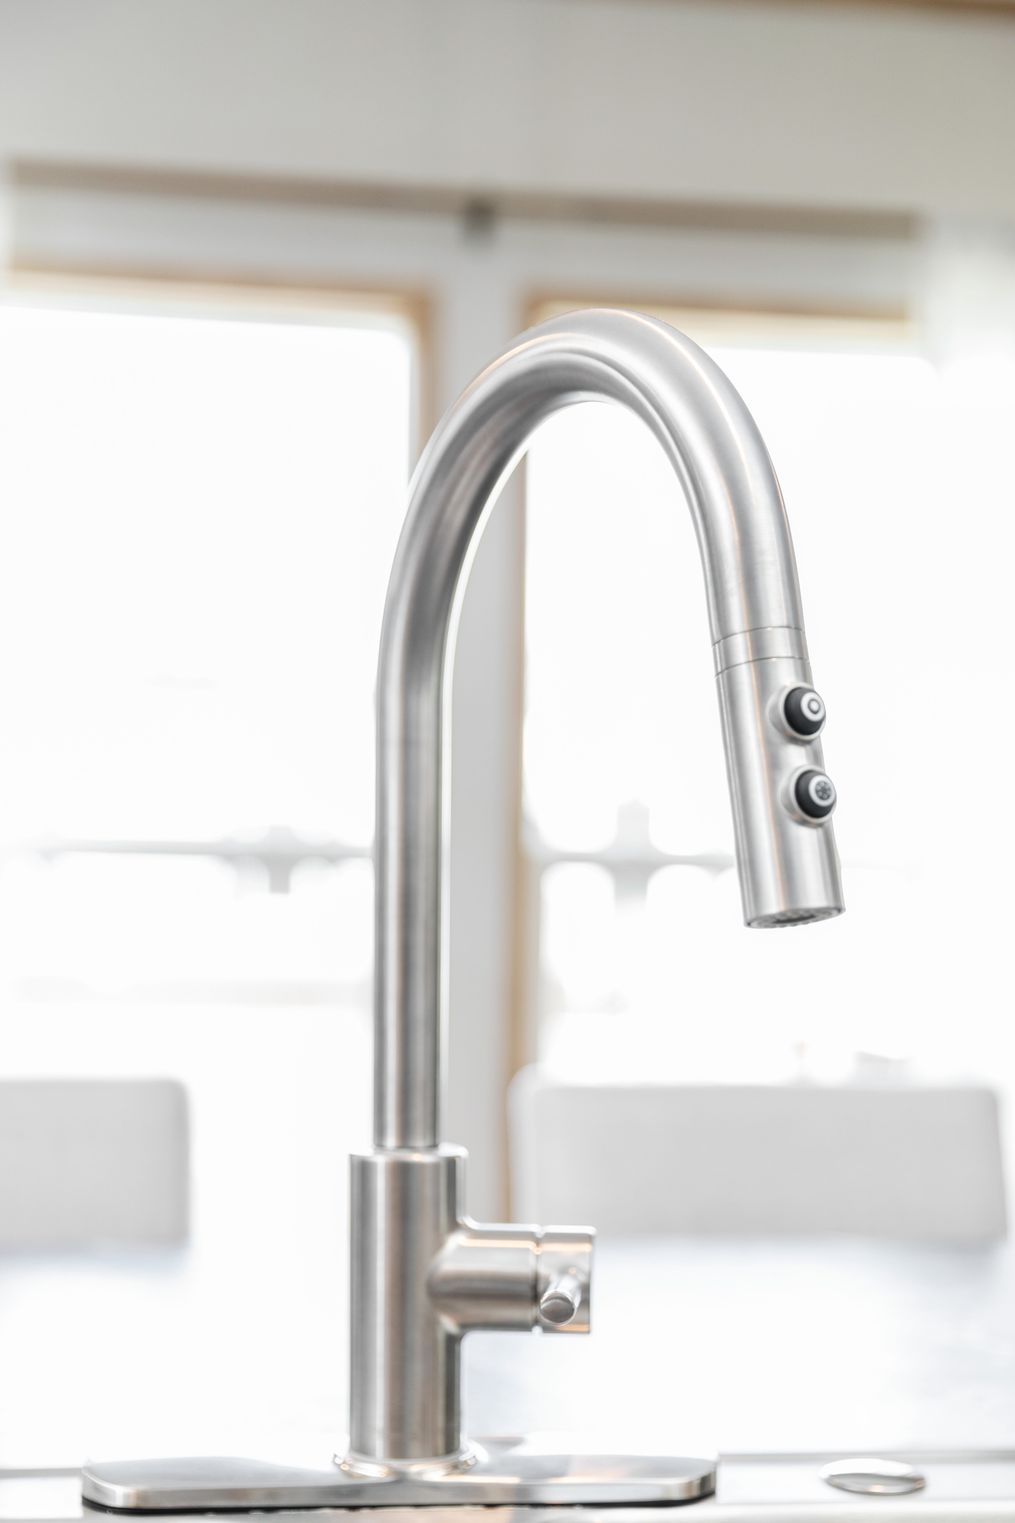 The SYDNEY Features Pfister metal faucet with pull out sprayer. This Manufactured Mobile Home features 3 bedrooms and 2 baths.